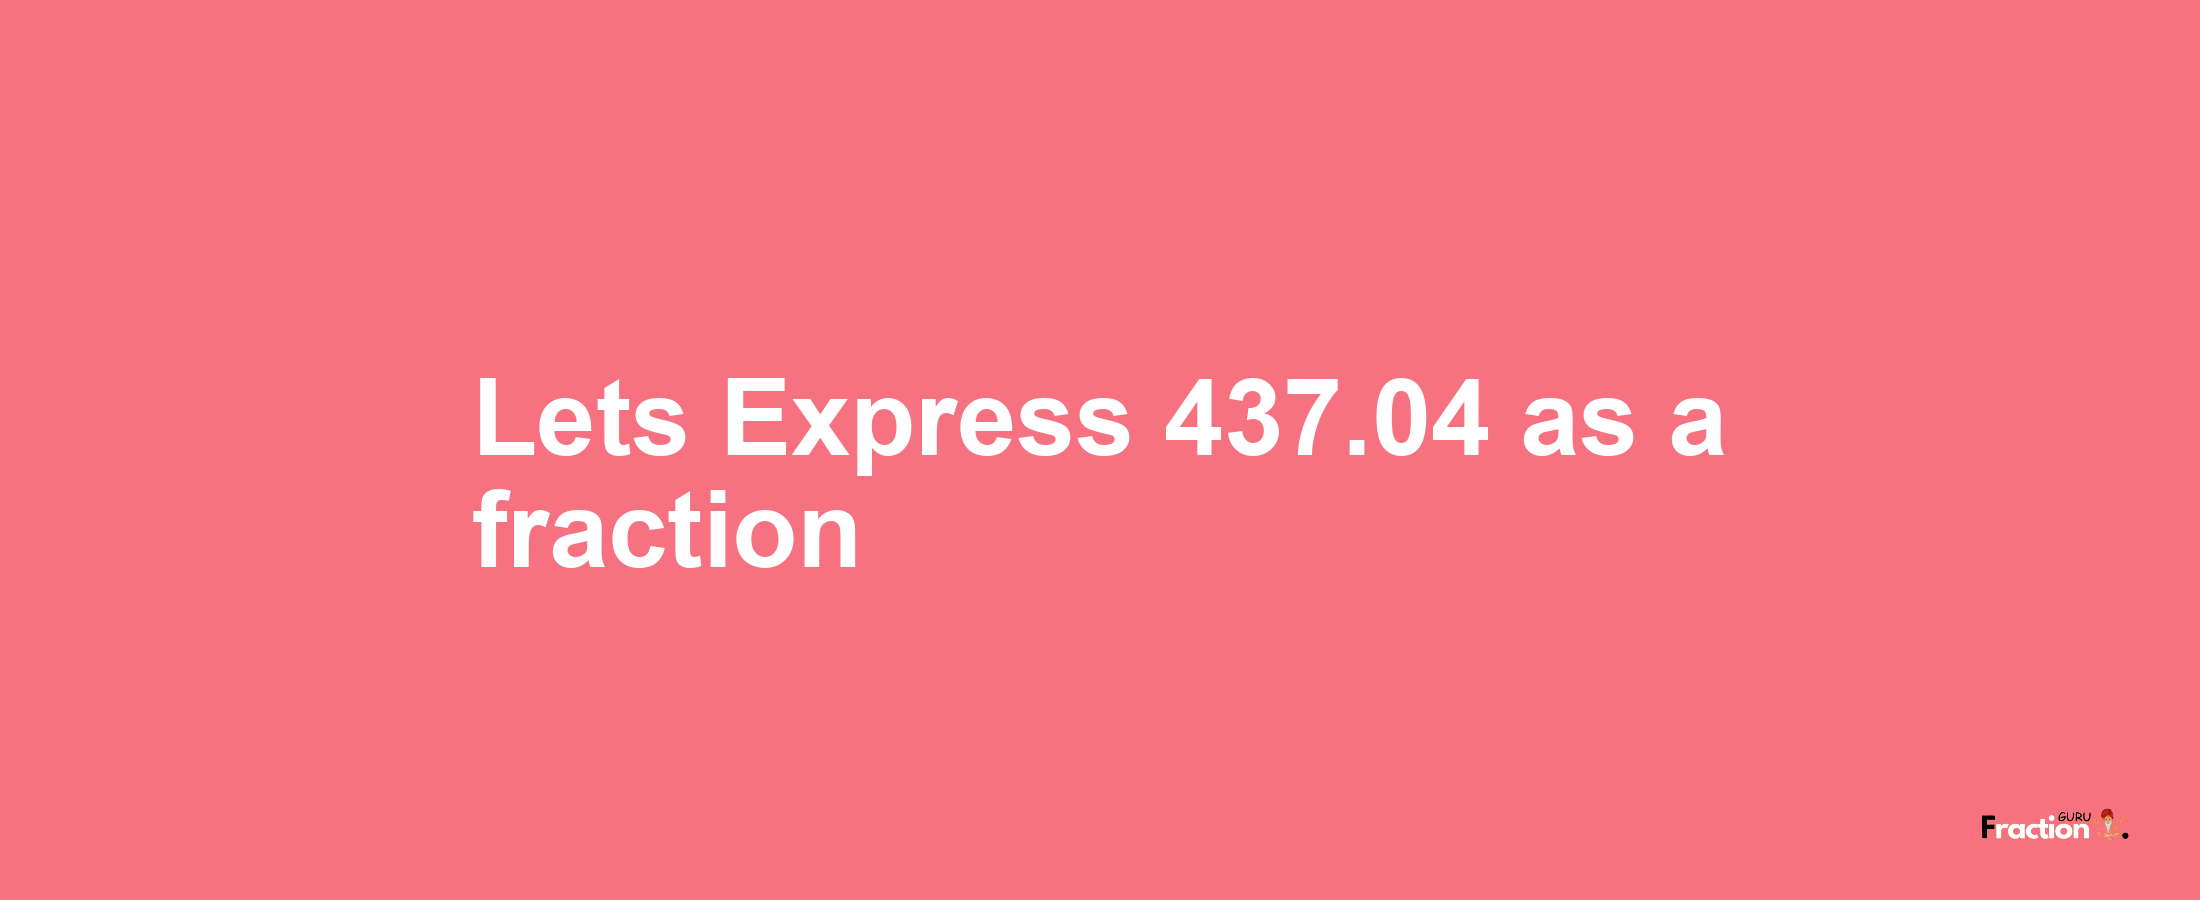 Lets Express 437.04 as afraction